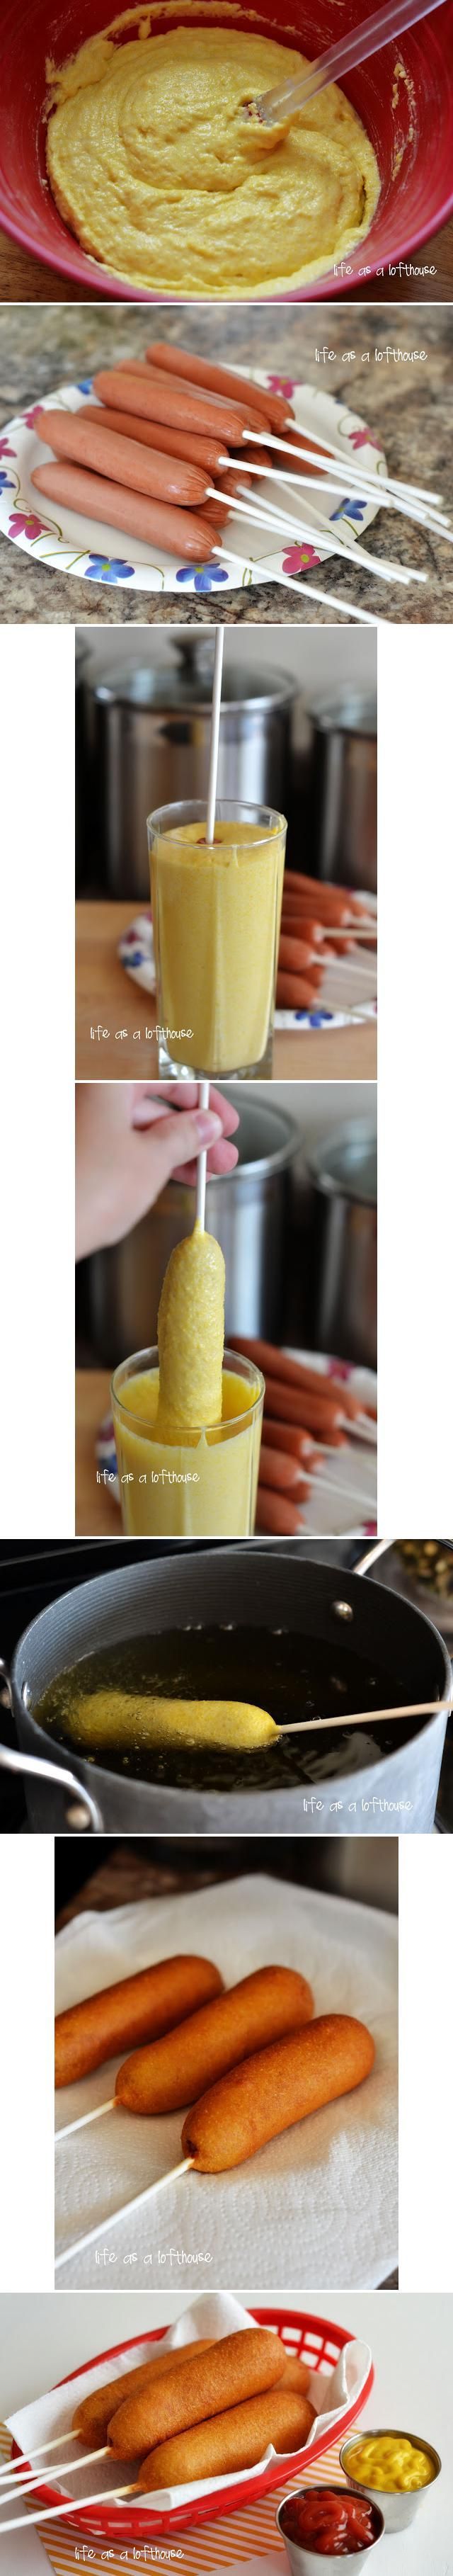 Homemade corn dogs step-by-step. When was the last time you had one? This recipe